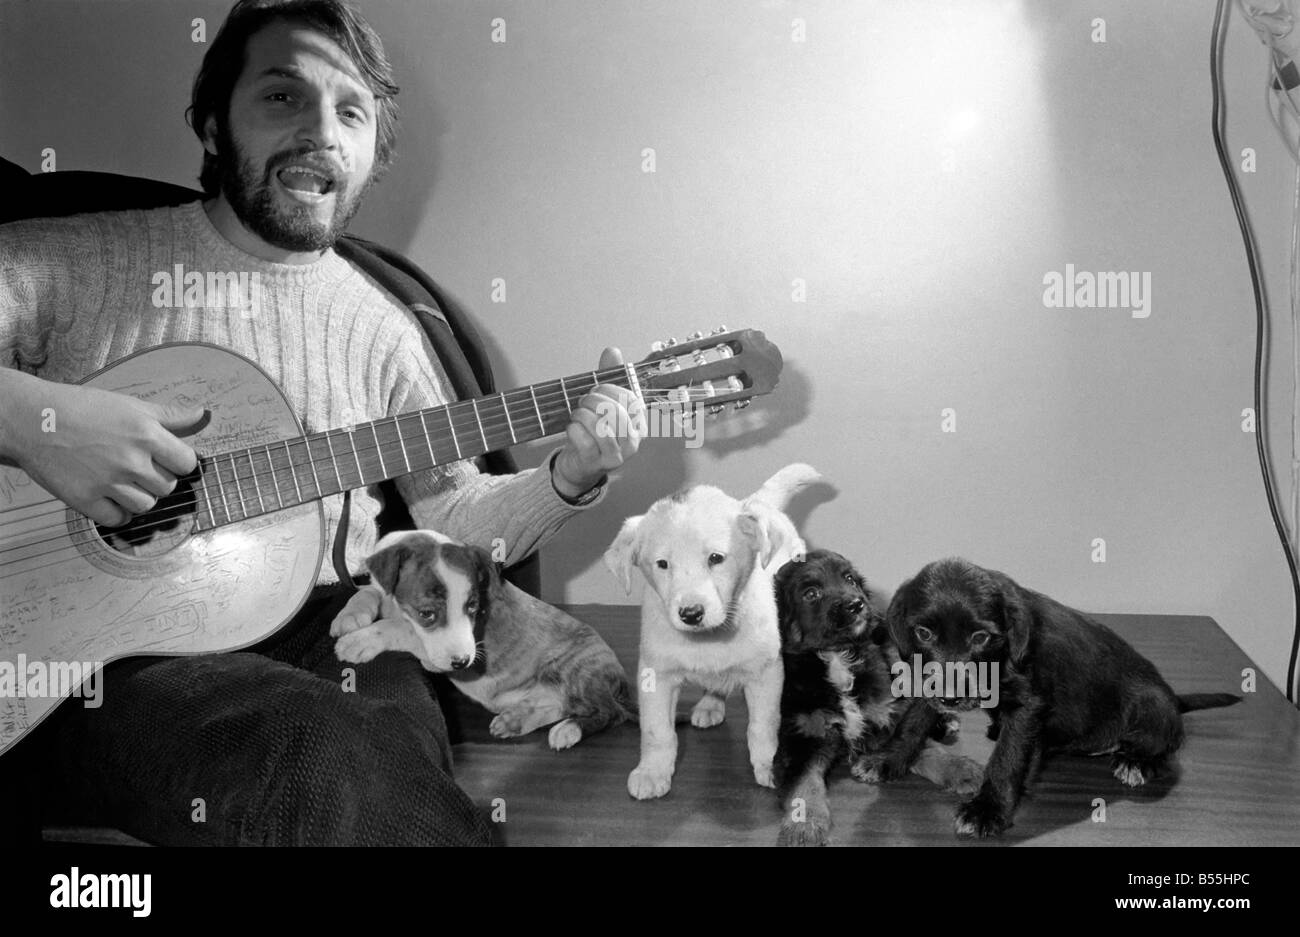 Salvatore Sangiorgi Italian singer and guitarist seen here at the RSPCA Home and Clinic Trenmare Gardens, London, singing to a pair of abandoned dogs December 1969 Z11924-002 Stock Photo